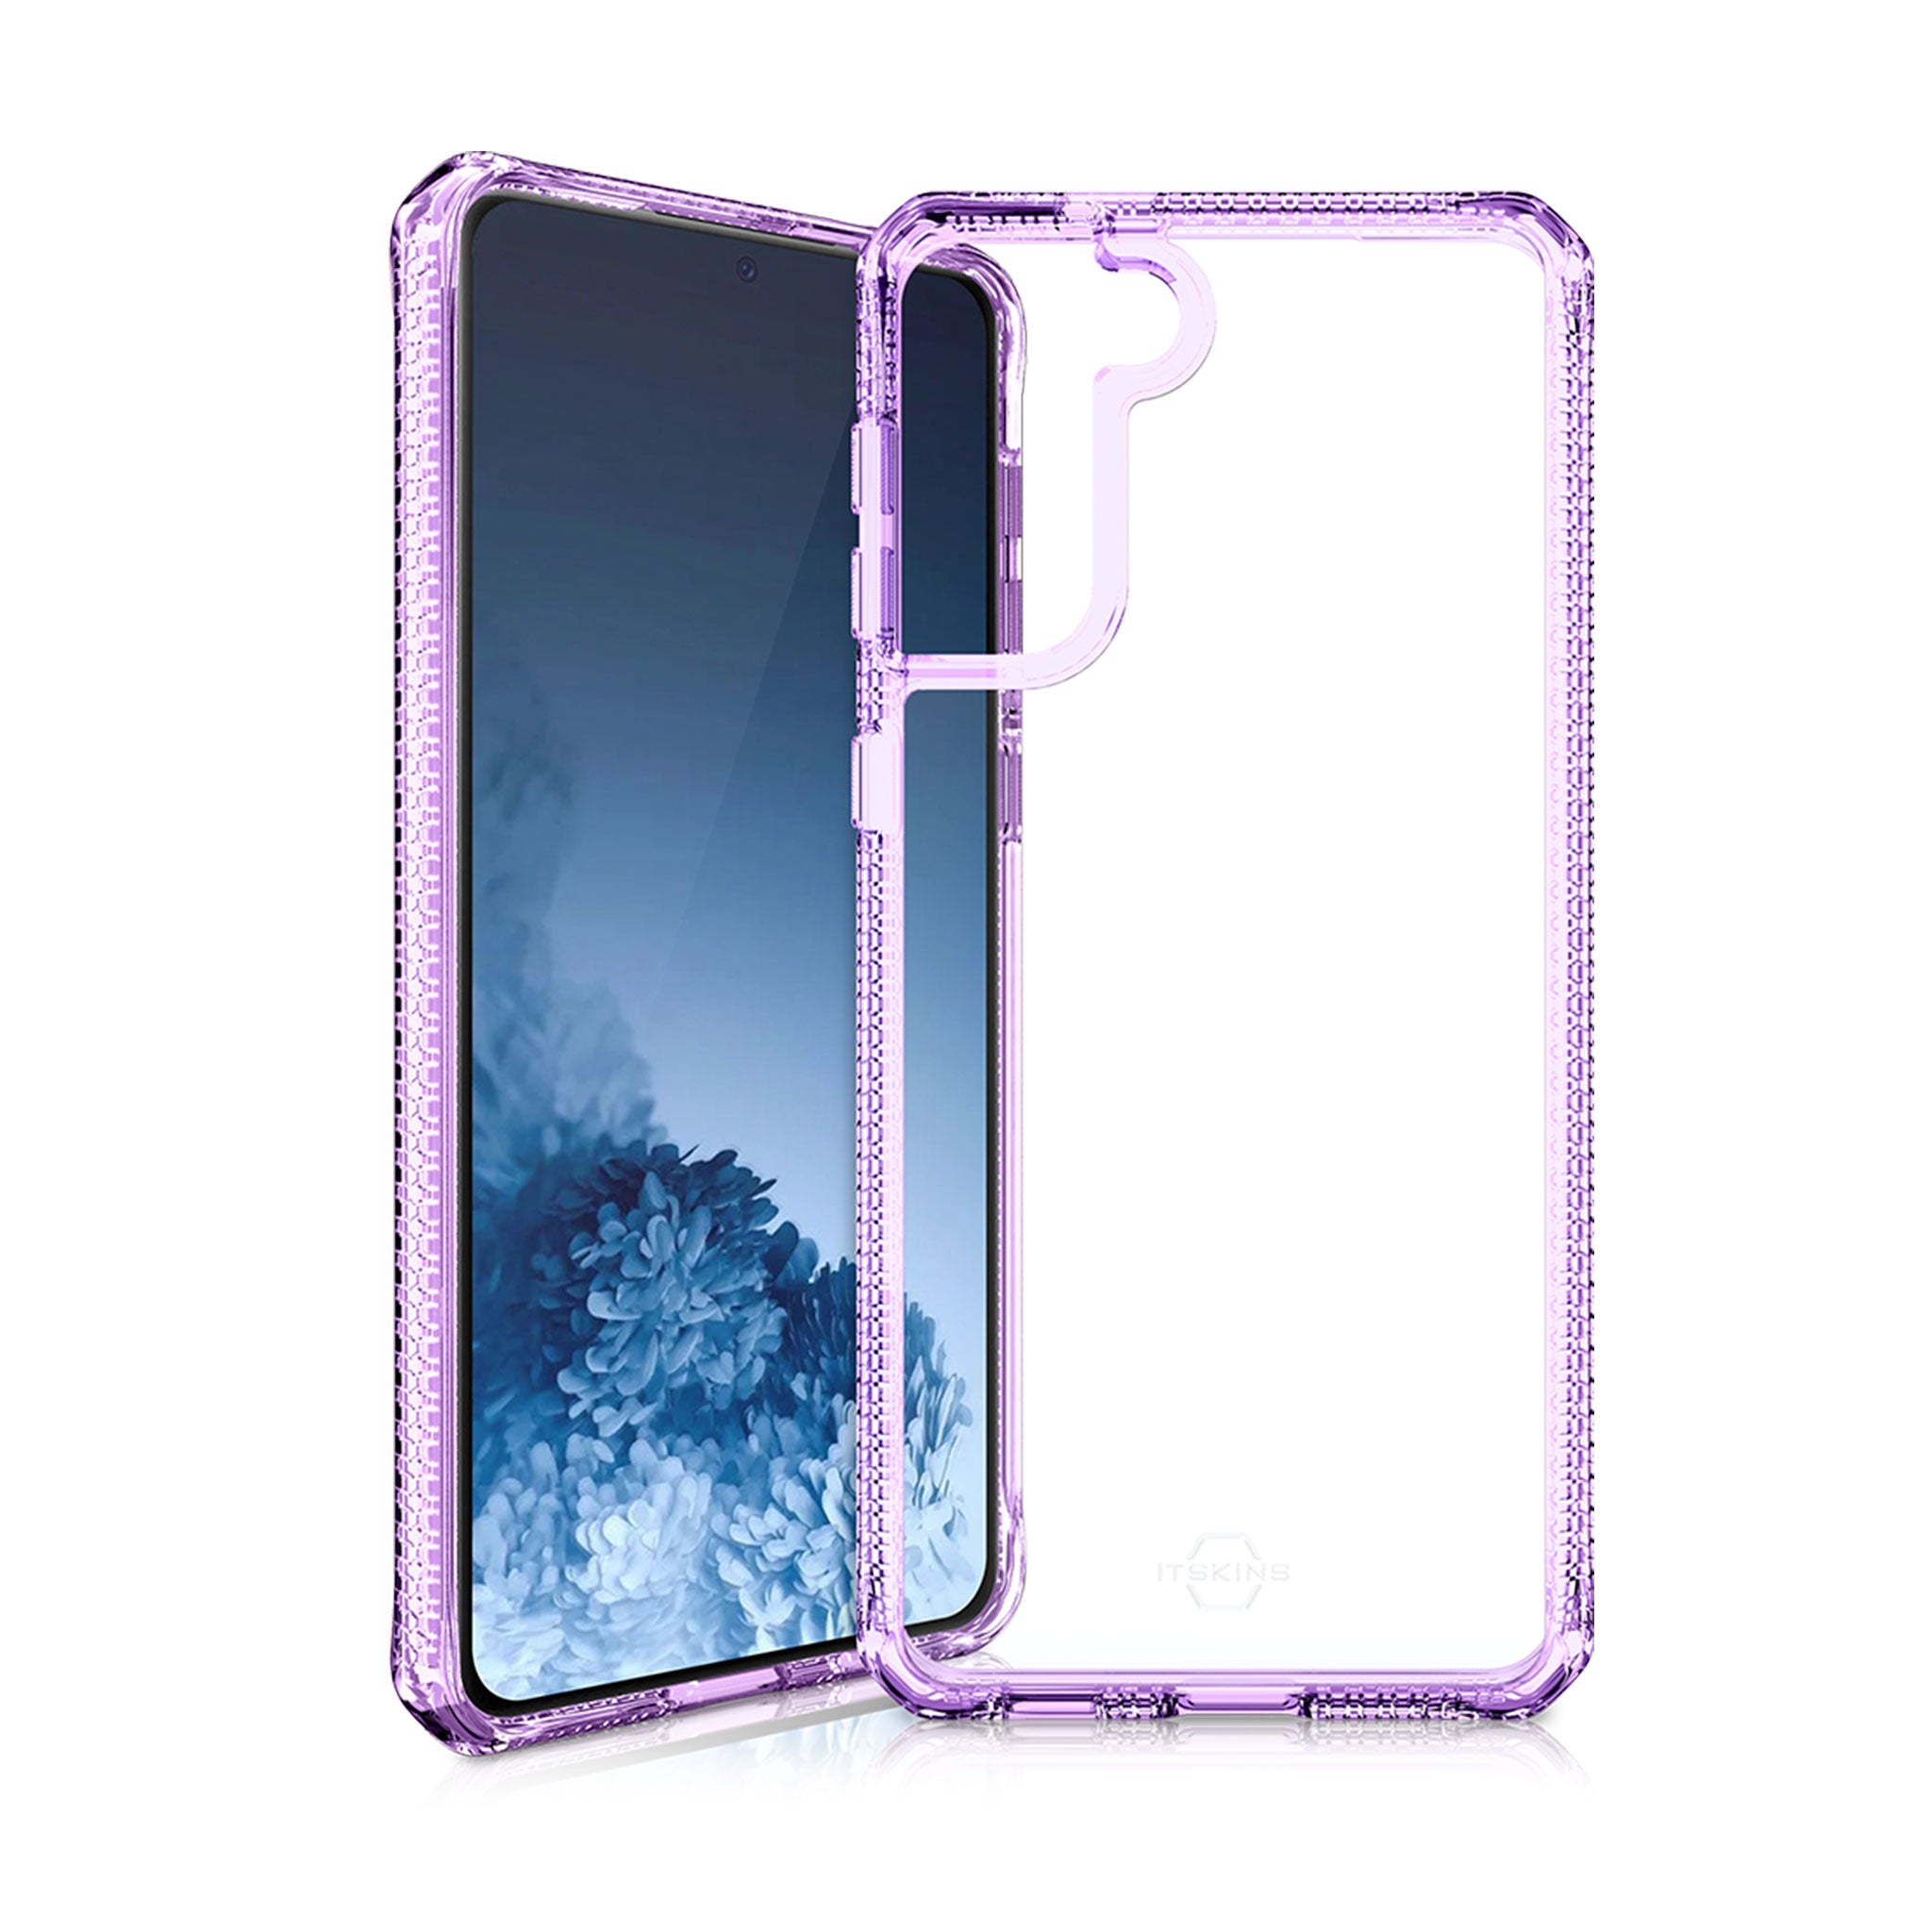 Itskins - Hybrid Clear Case For Samsung Galaxy S21 5g - Violet And Transparent